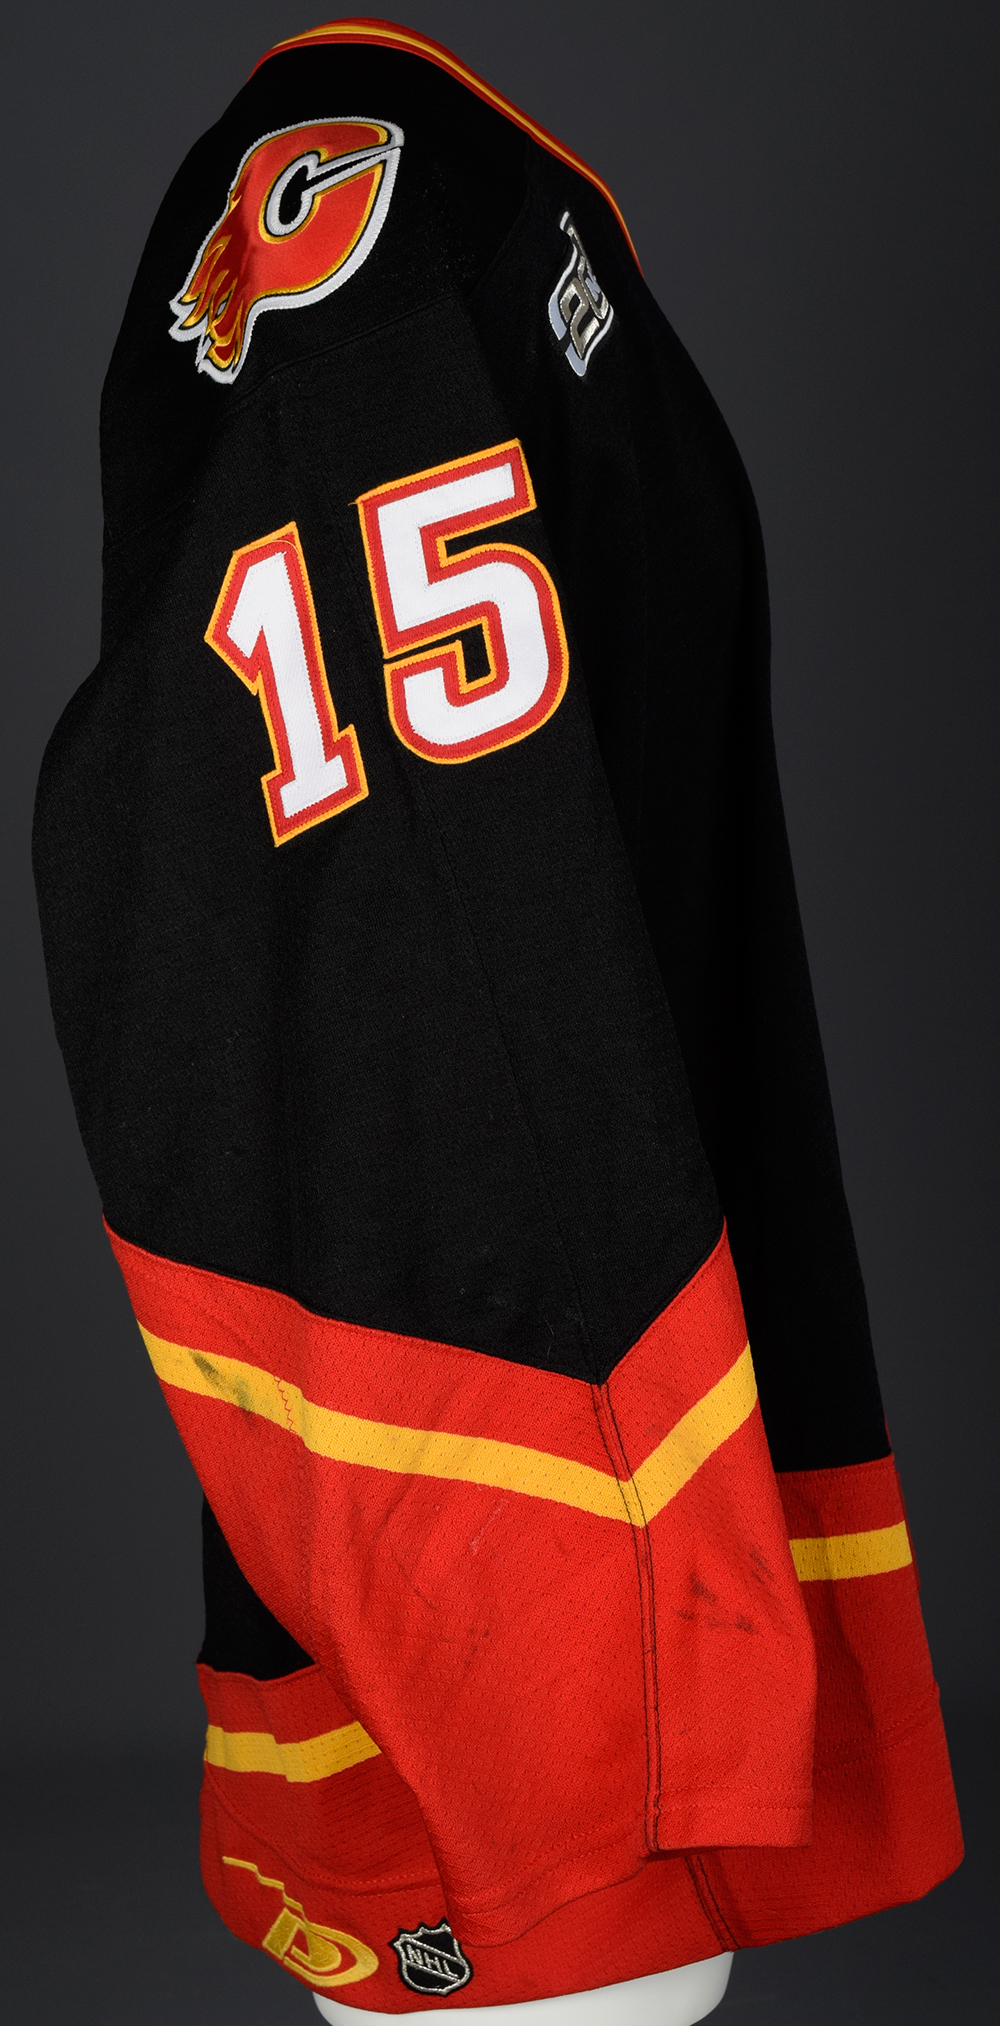 Martin St. Louis 99'00 ROOKIE Calgary Flames Game Worn Jersey